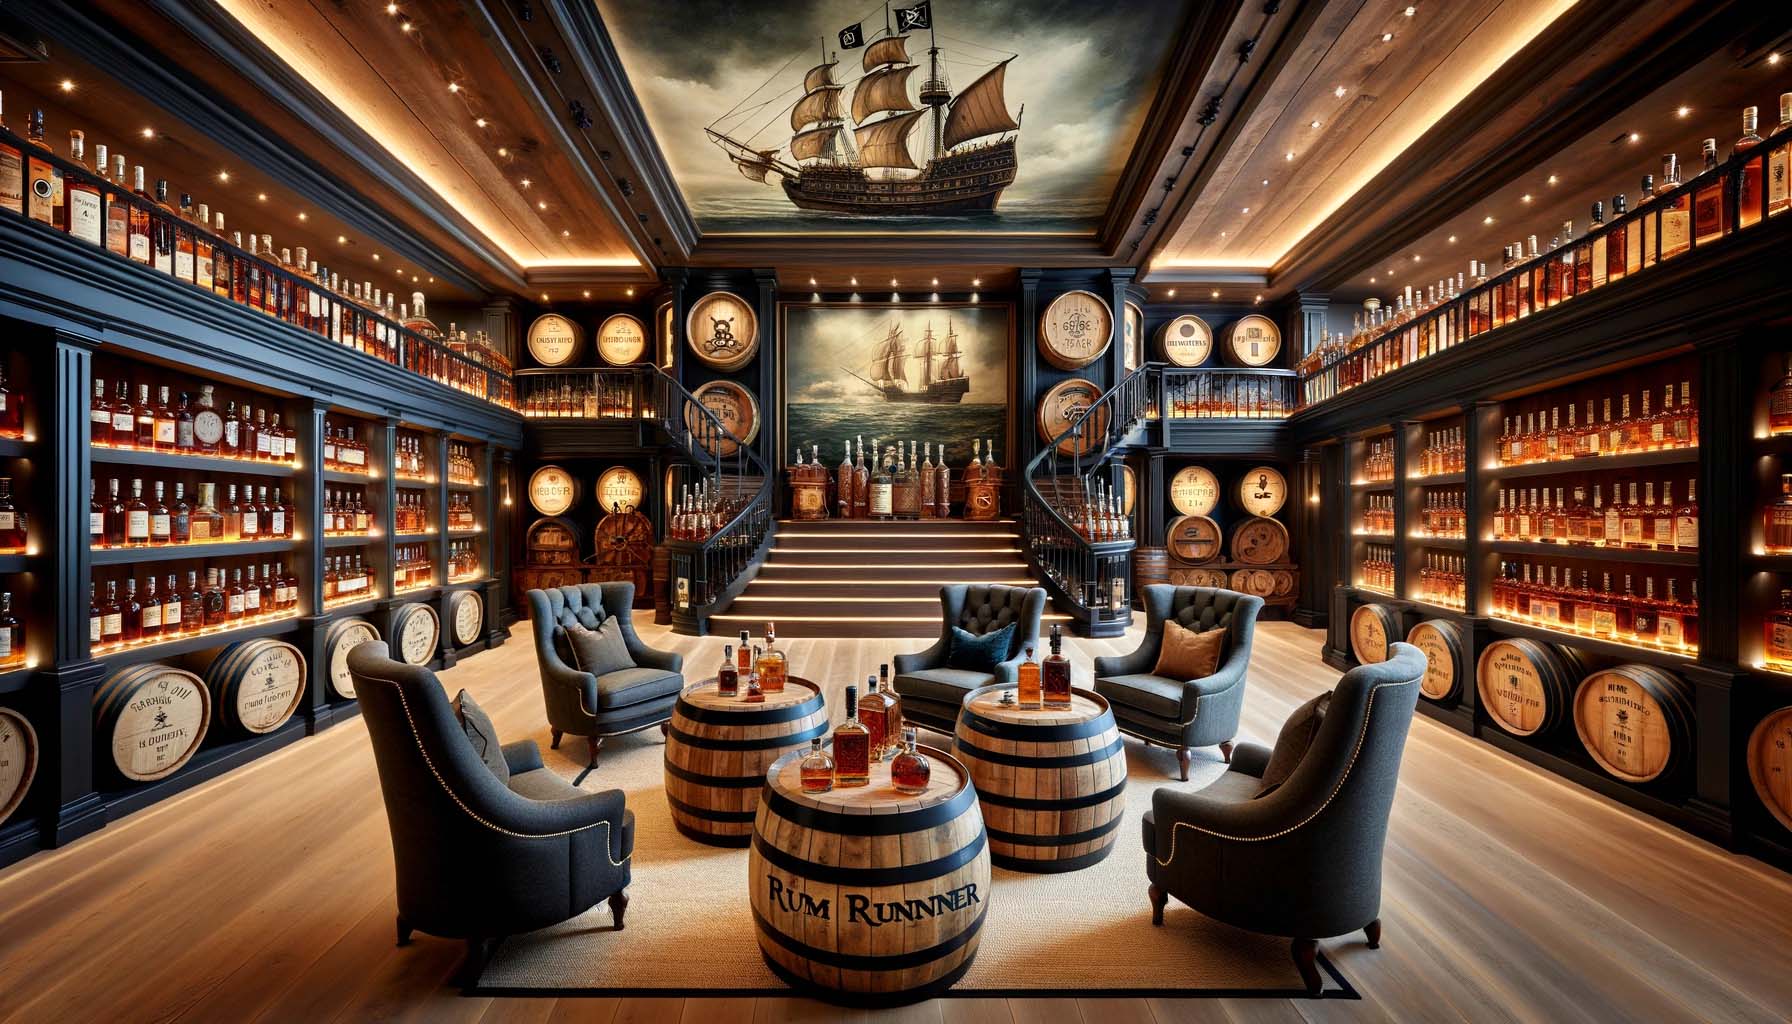 Carbon Heritage showcasing luxurious rum runner lounge getaway for the extreme connoisseur